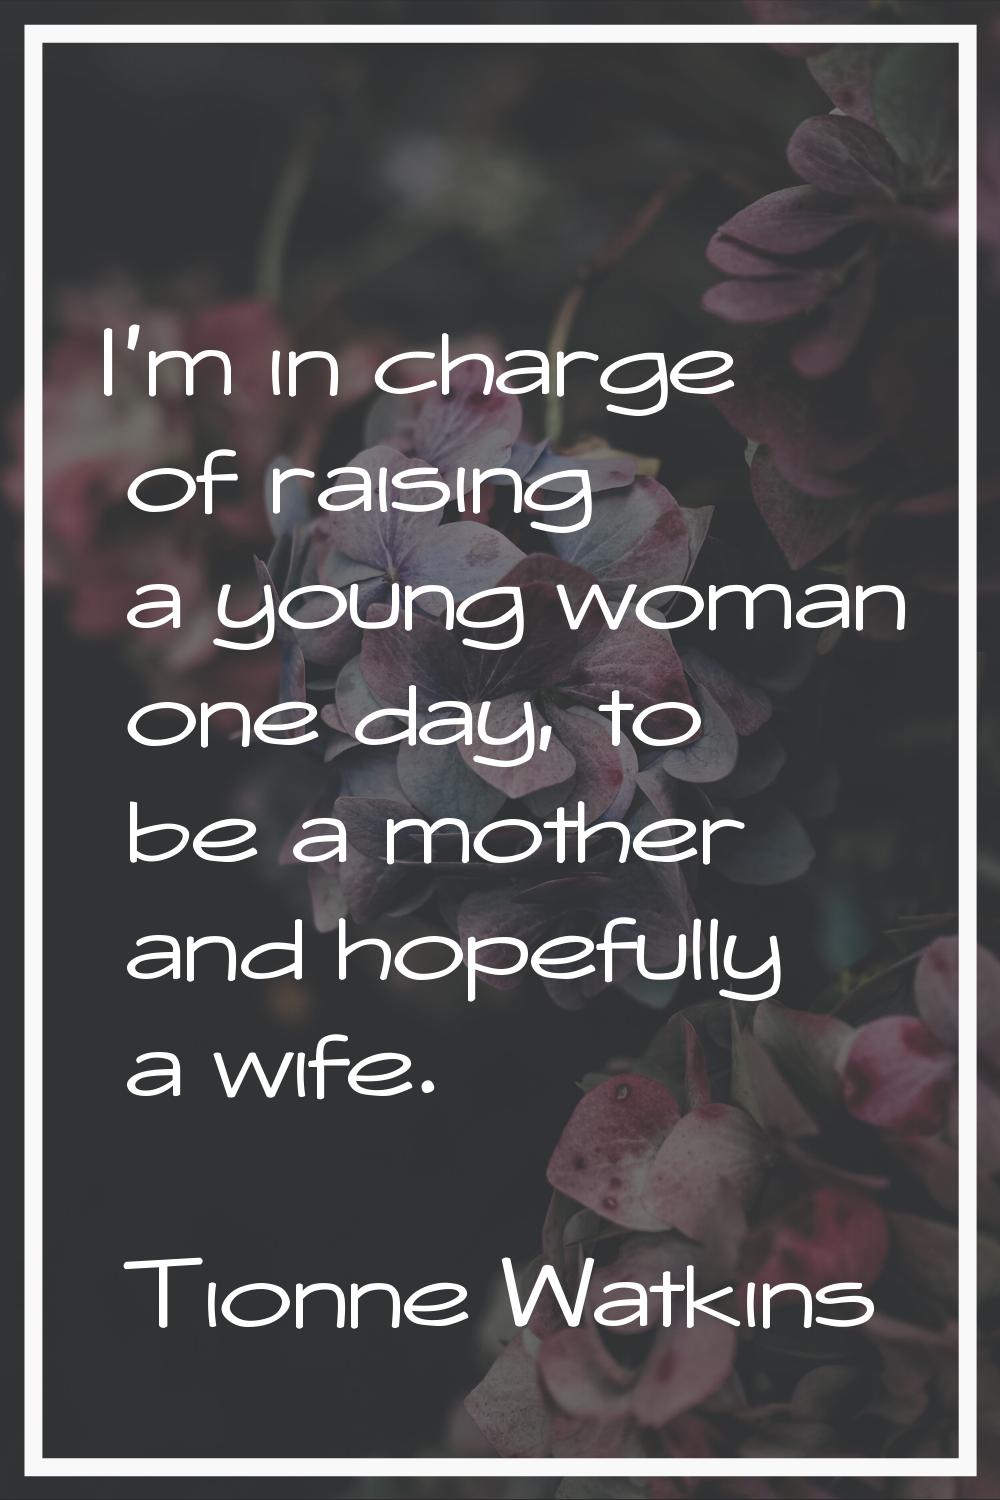 I'm in charge of raising a young woman one day, to be a mother and hopefully a wife.